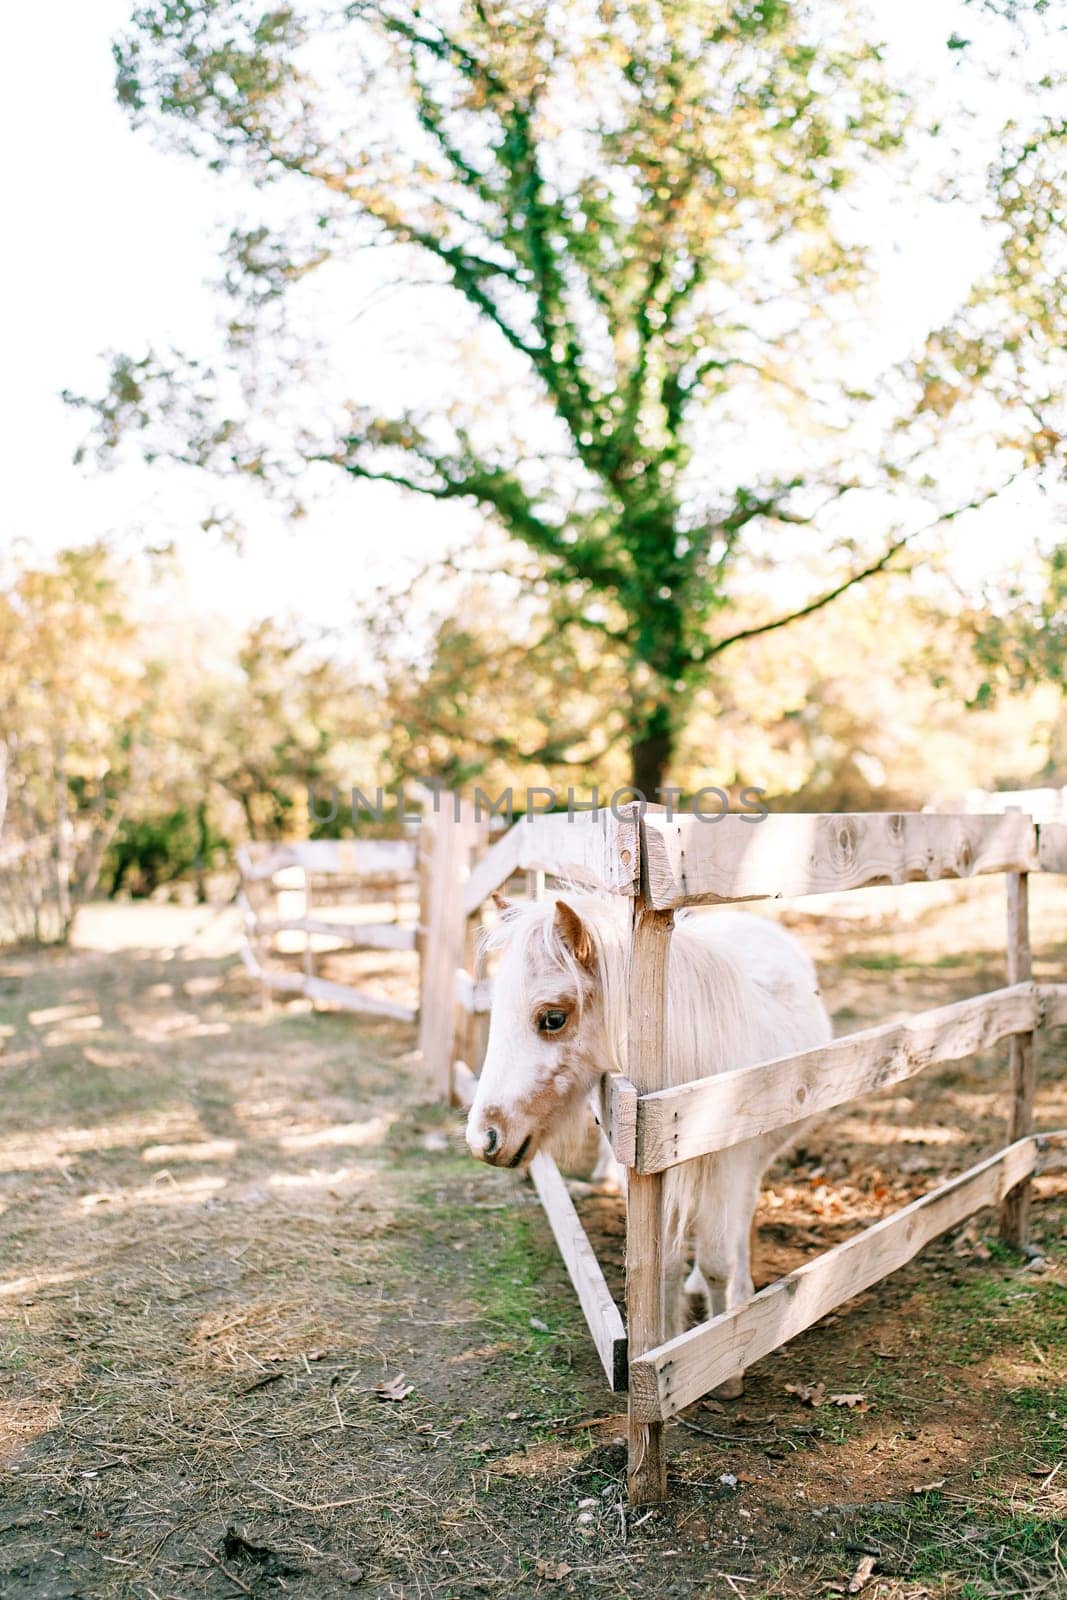 Small white pony peeks out from behind a wooden fence on a ranch by Nadtochiy